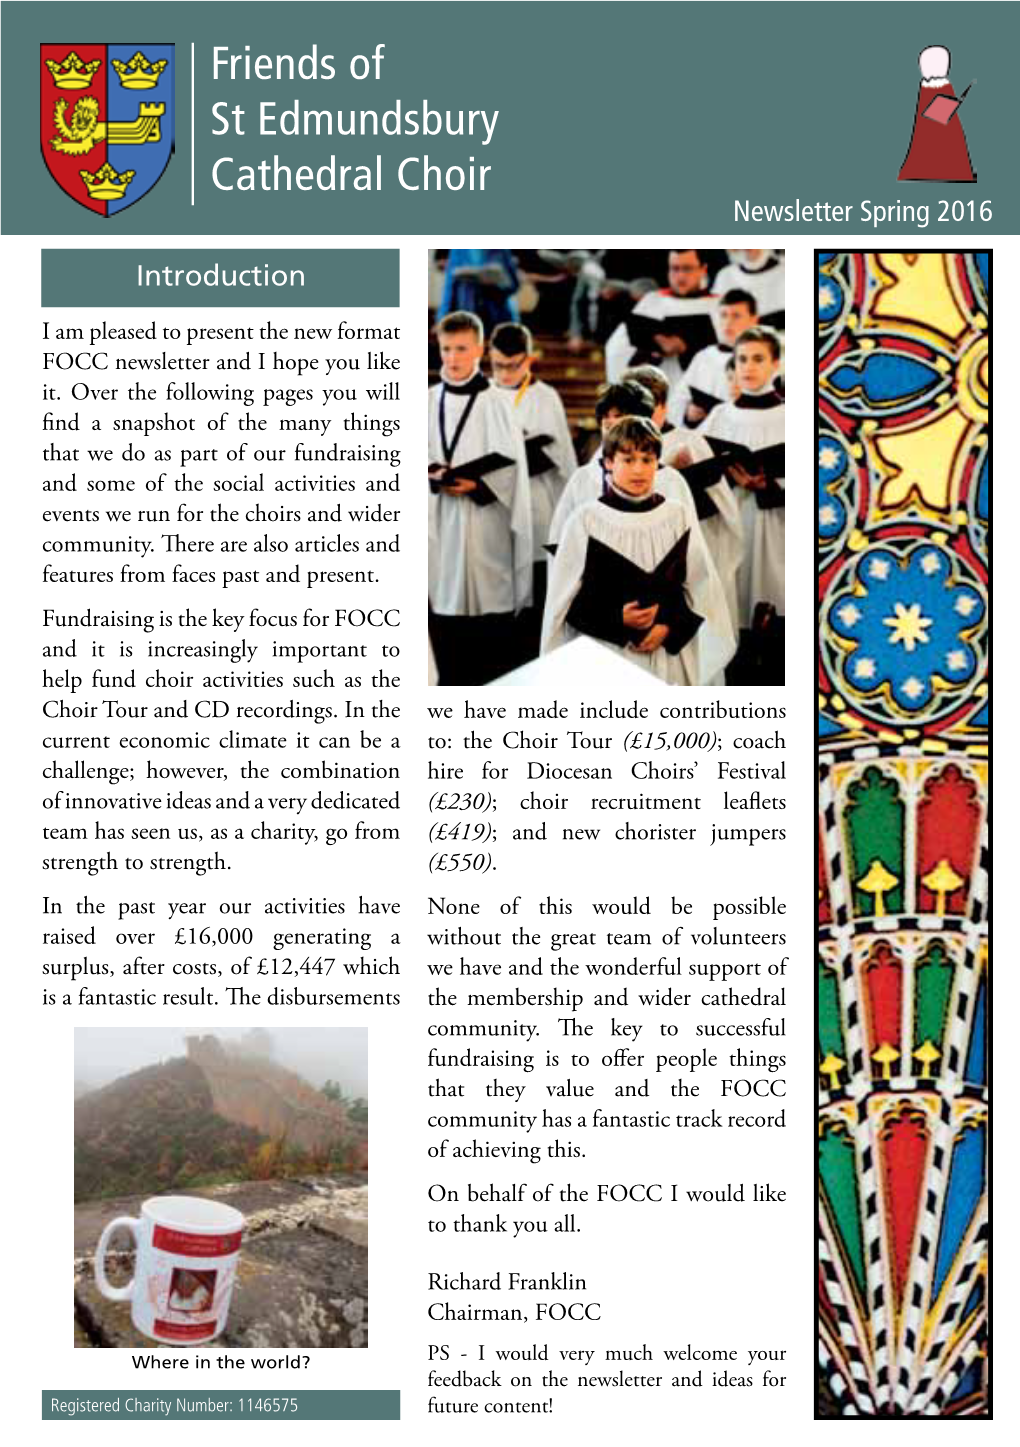 Friends of St Edmundsbury Cathedral Choir Newsletter Spring 2016